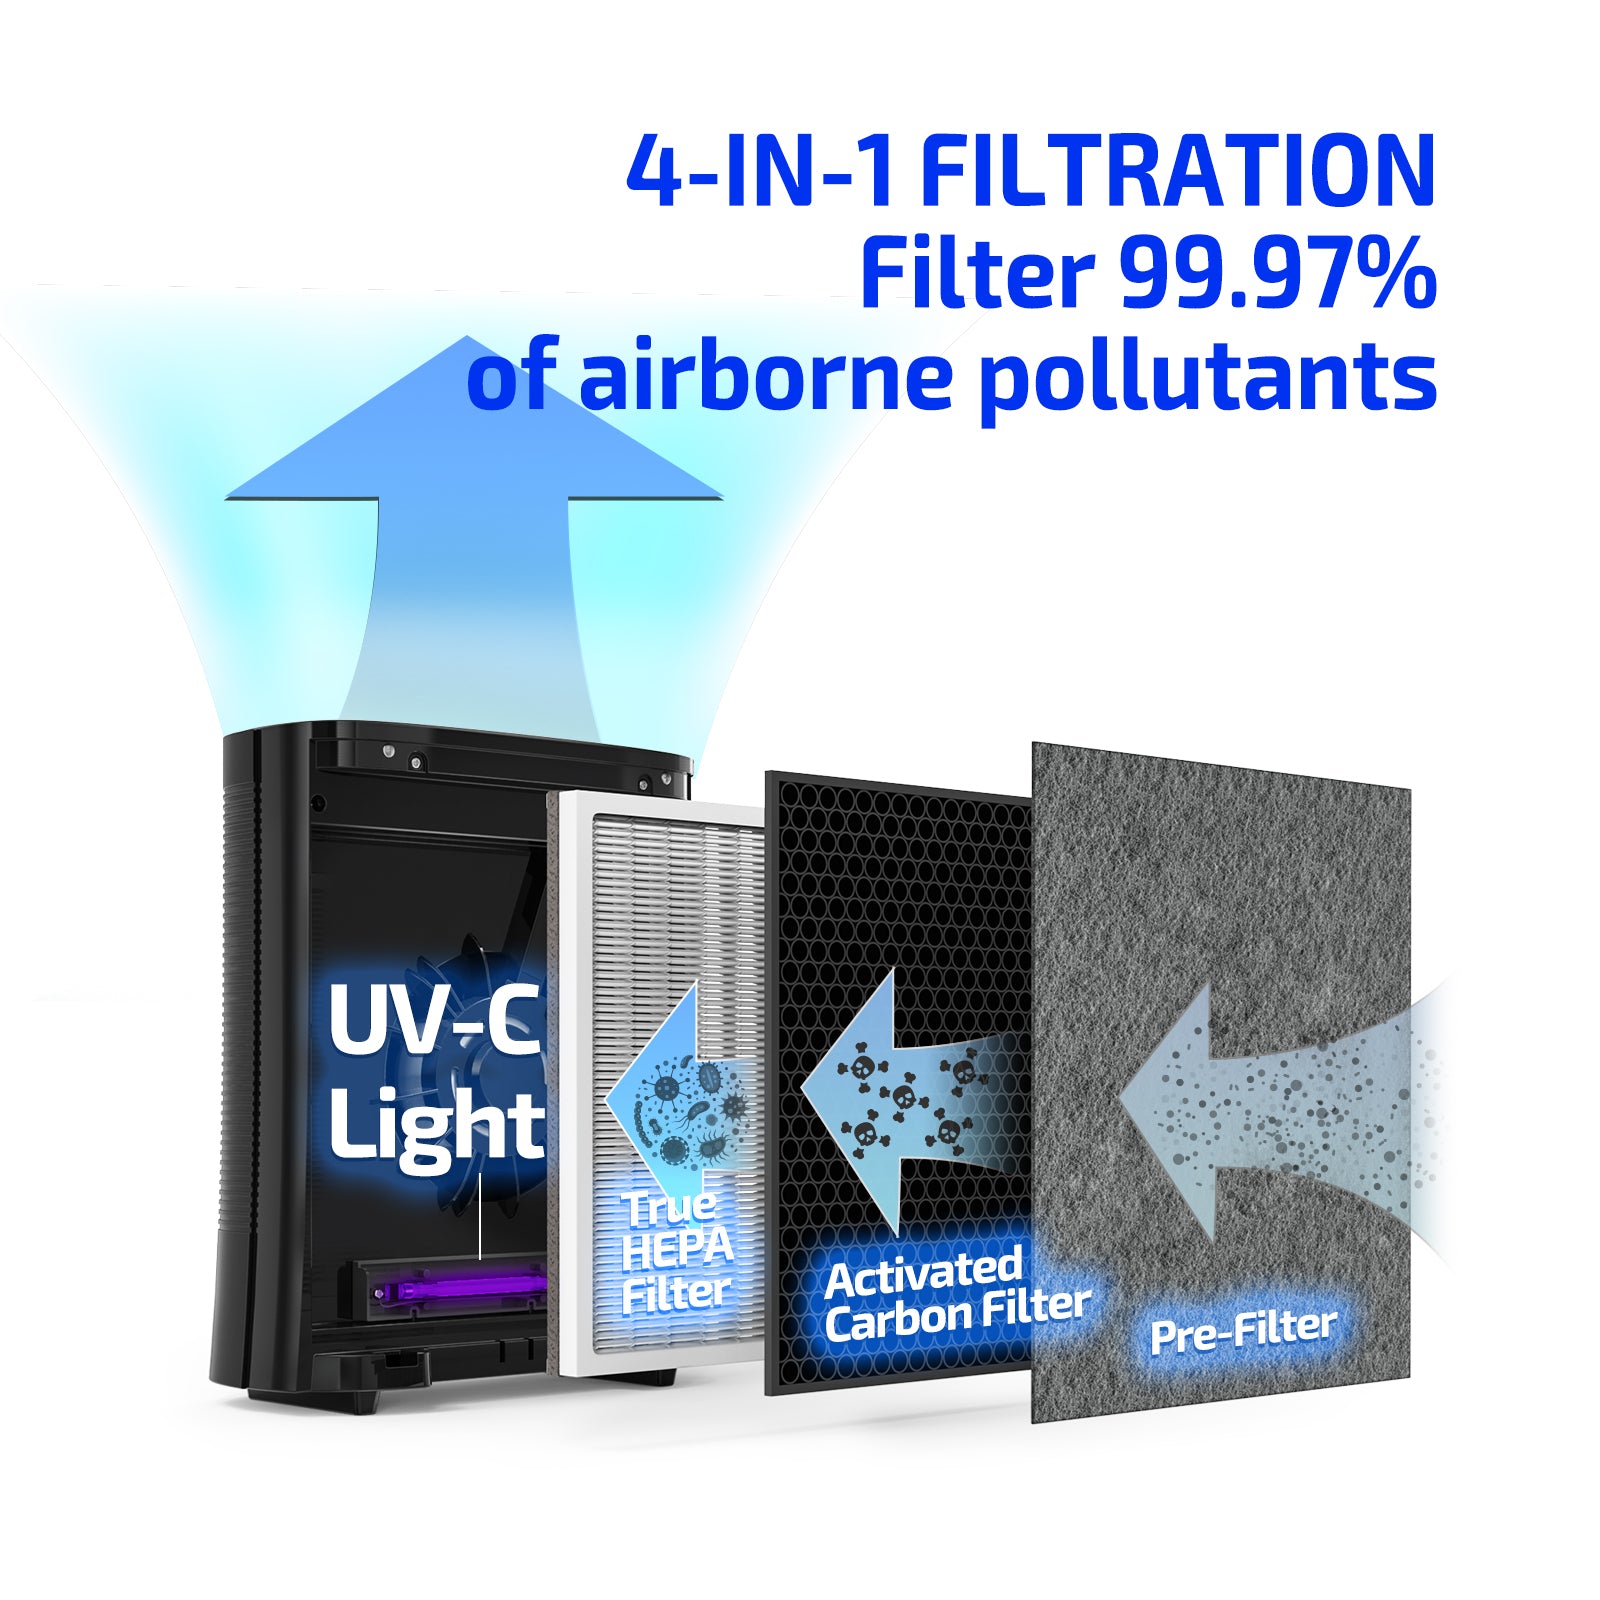 Air Purifiers AP010,with UV-C Light Sanitizer, Purifier with 3 in1 True HEPA Fits-Air Purifiers-ParisRhone